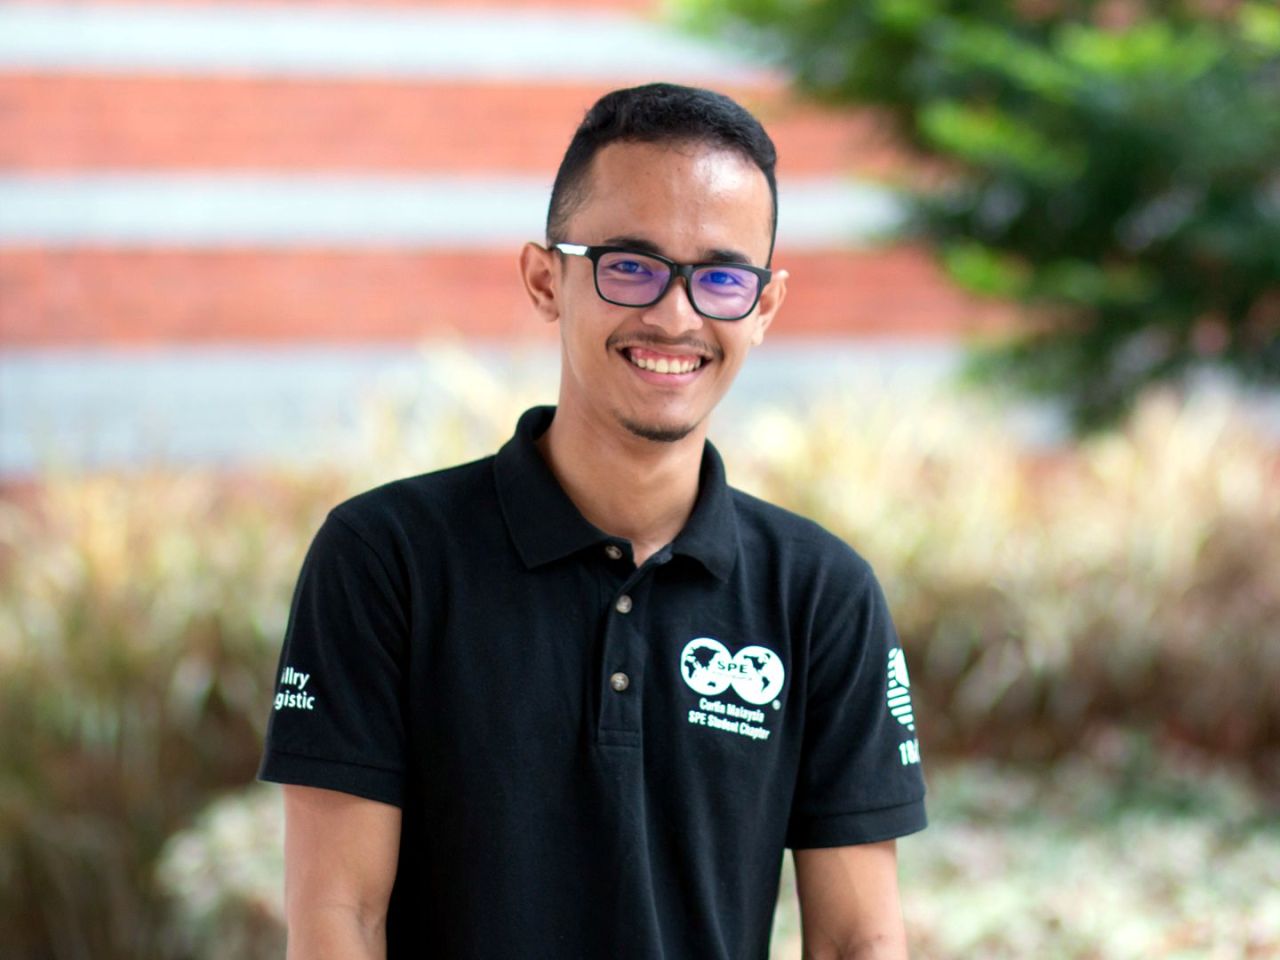 “I have lived my whole life in Miri and my journey at Curtin Malaysia began as soon as I completed secondary school. Aside from receiving a scholarship, the main reason I chose Curtin Malaysia was its location in Miri. “Home is where the heart is” –...